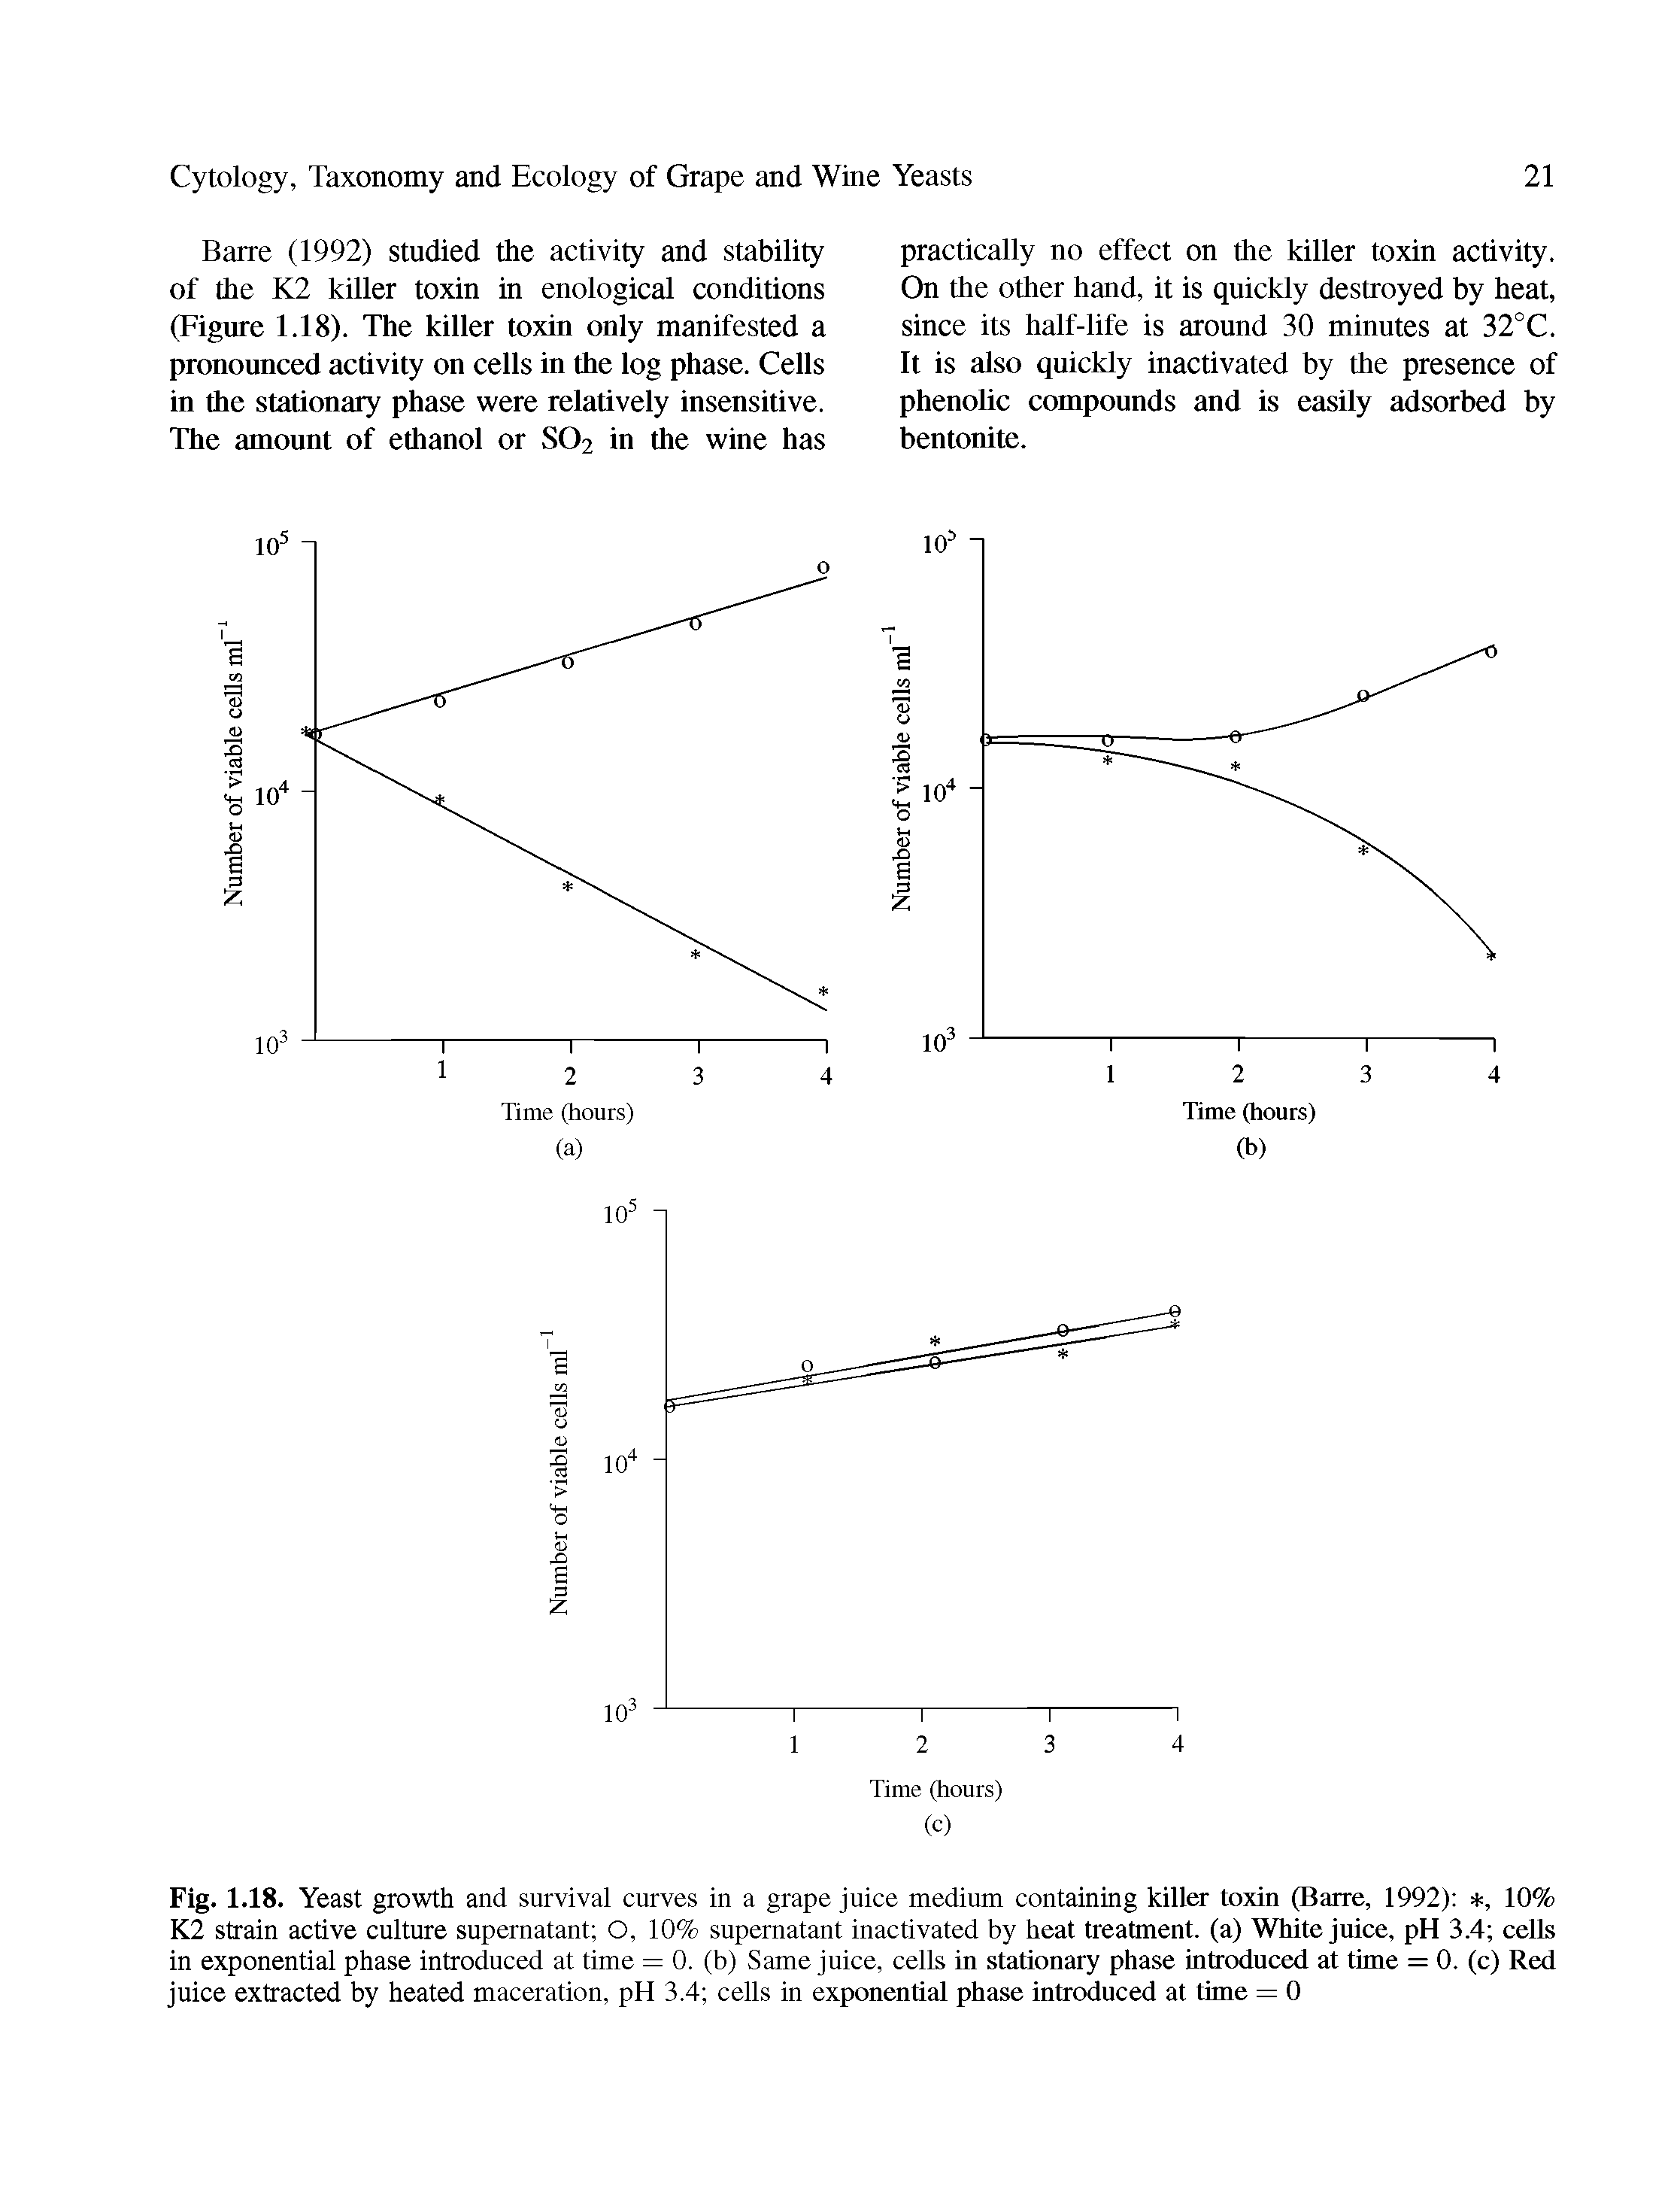 Fig. 1.18. Yeast growth and survival curves in a grape juice medium containing killer toxin (Barre, 1992) +, 10% K2 strain active culture supernatant O, 10% supernatant inactivated by heat treatment, (a) White juice, pH 3.4 cells in exponential phase introduced at time = 0. (b) Same juice, cells in stationary phase introduced at time = 0. (c) Red juice extracted by heated maceration, pH 3.4 cells in exponential phase introduced at time = 0...